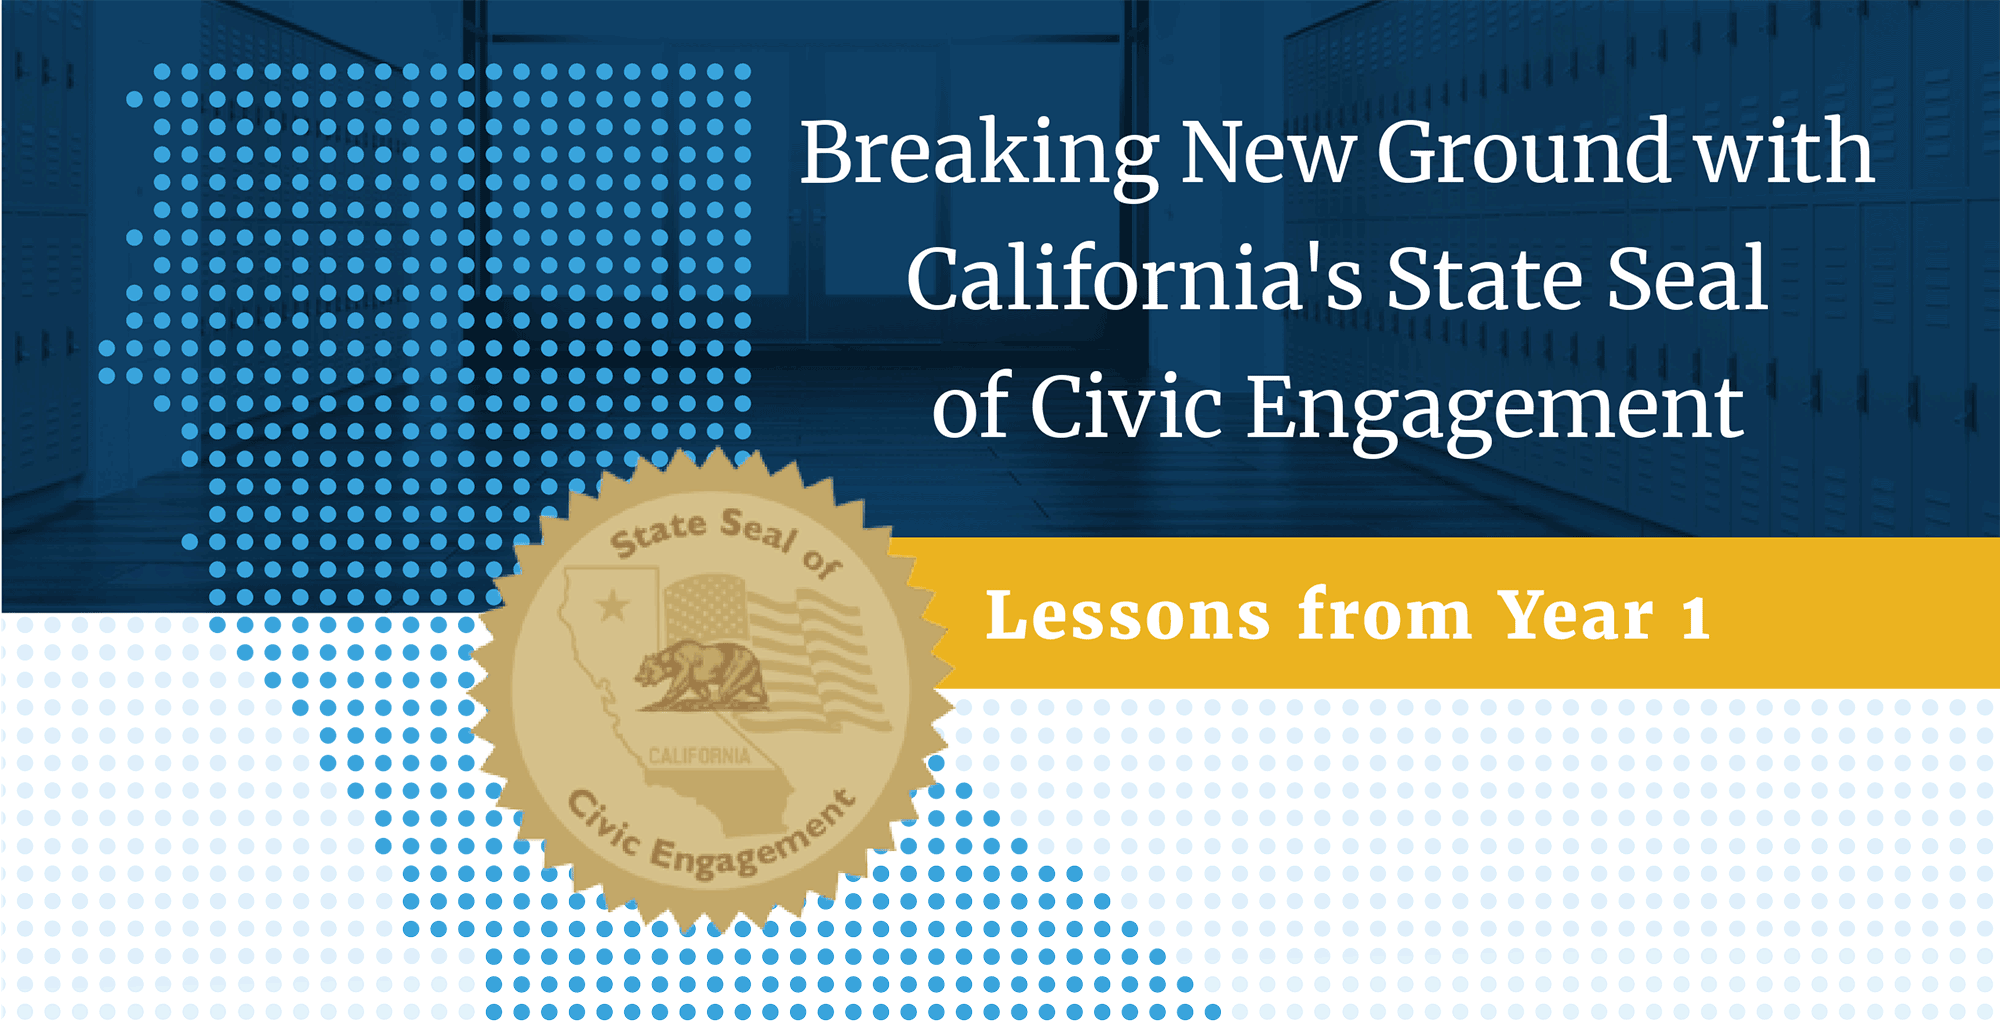 Breaking New Ground with California's State Seal of Civic Engagement